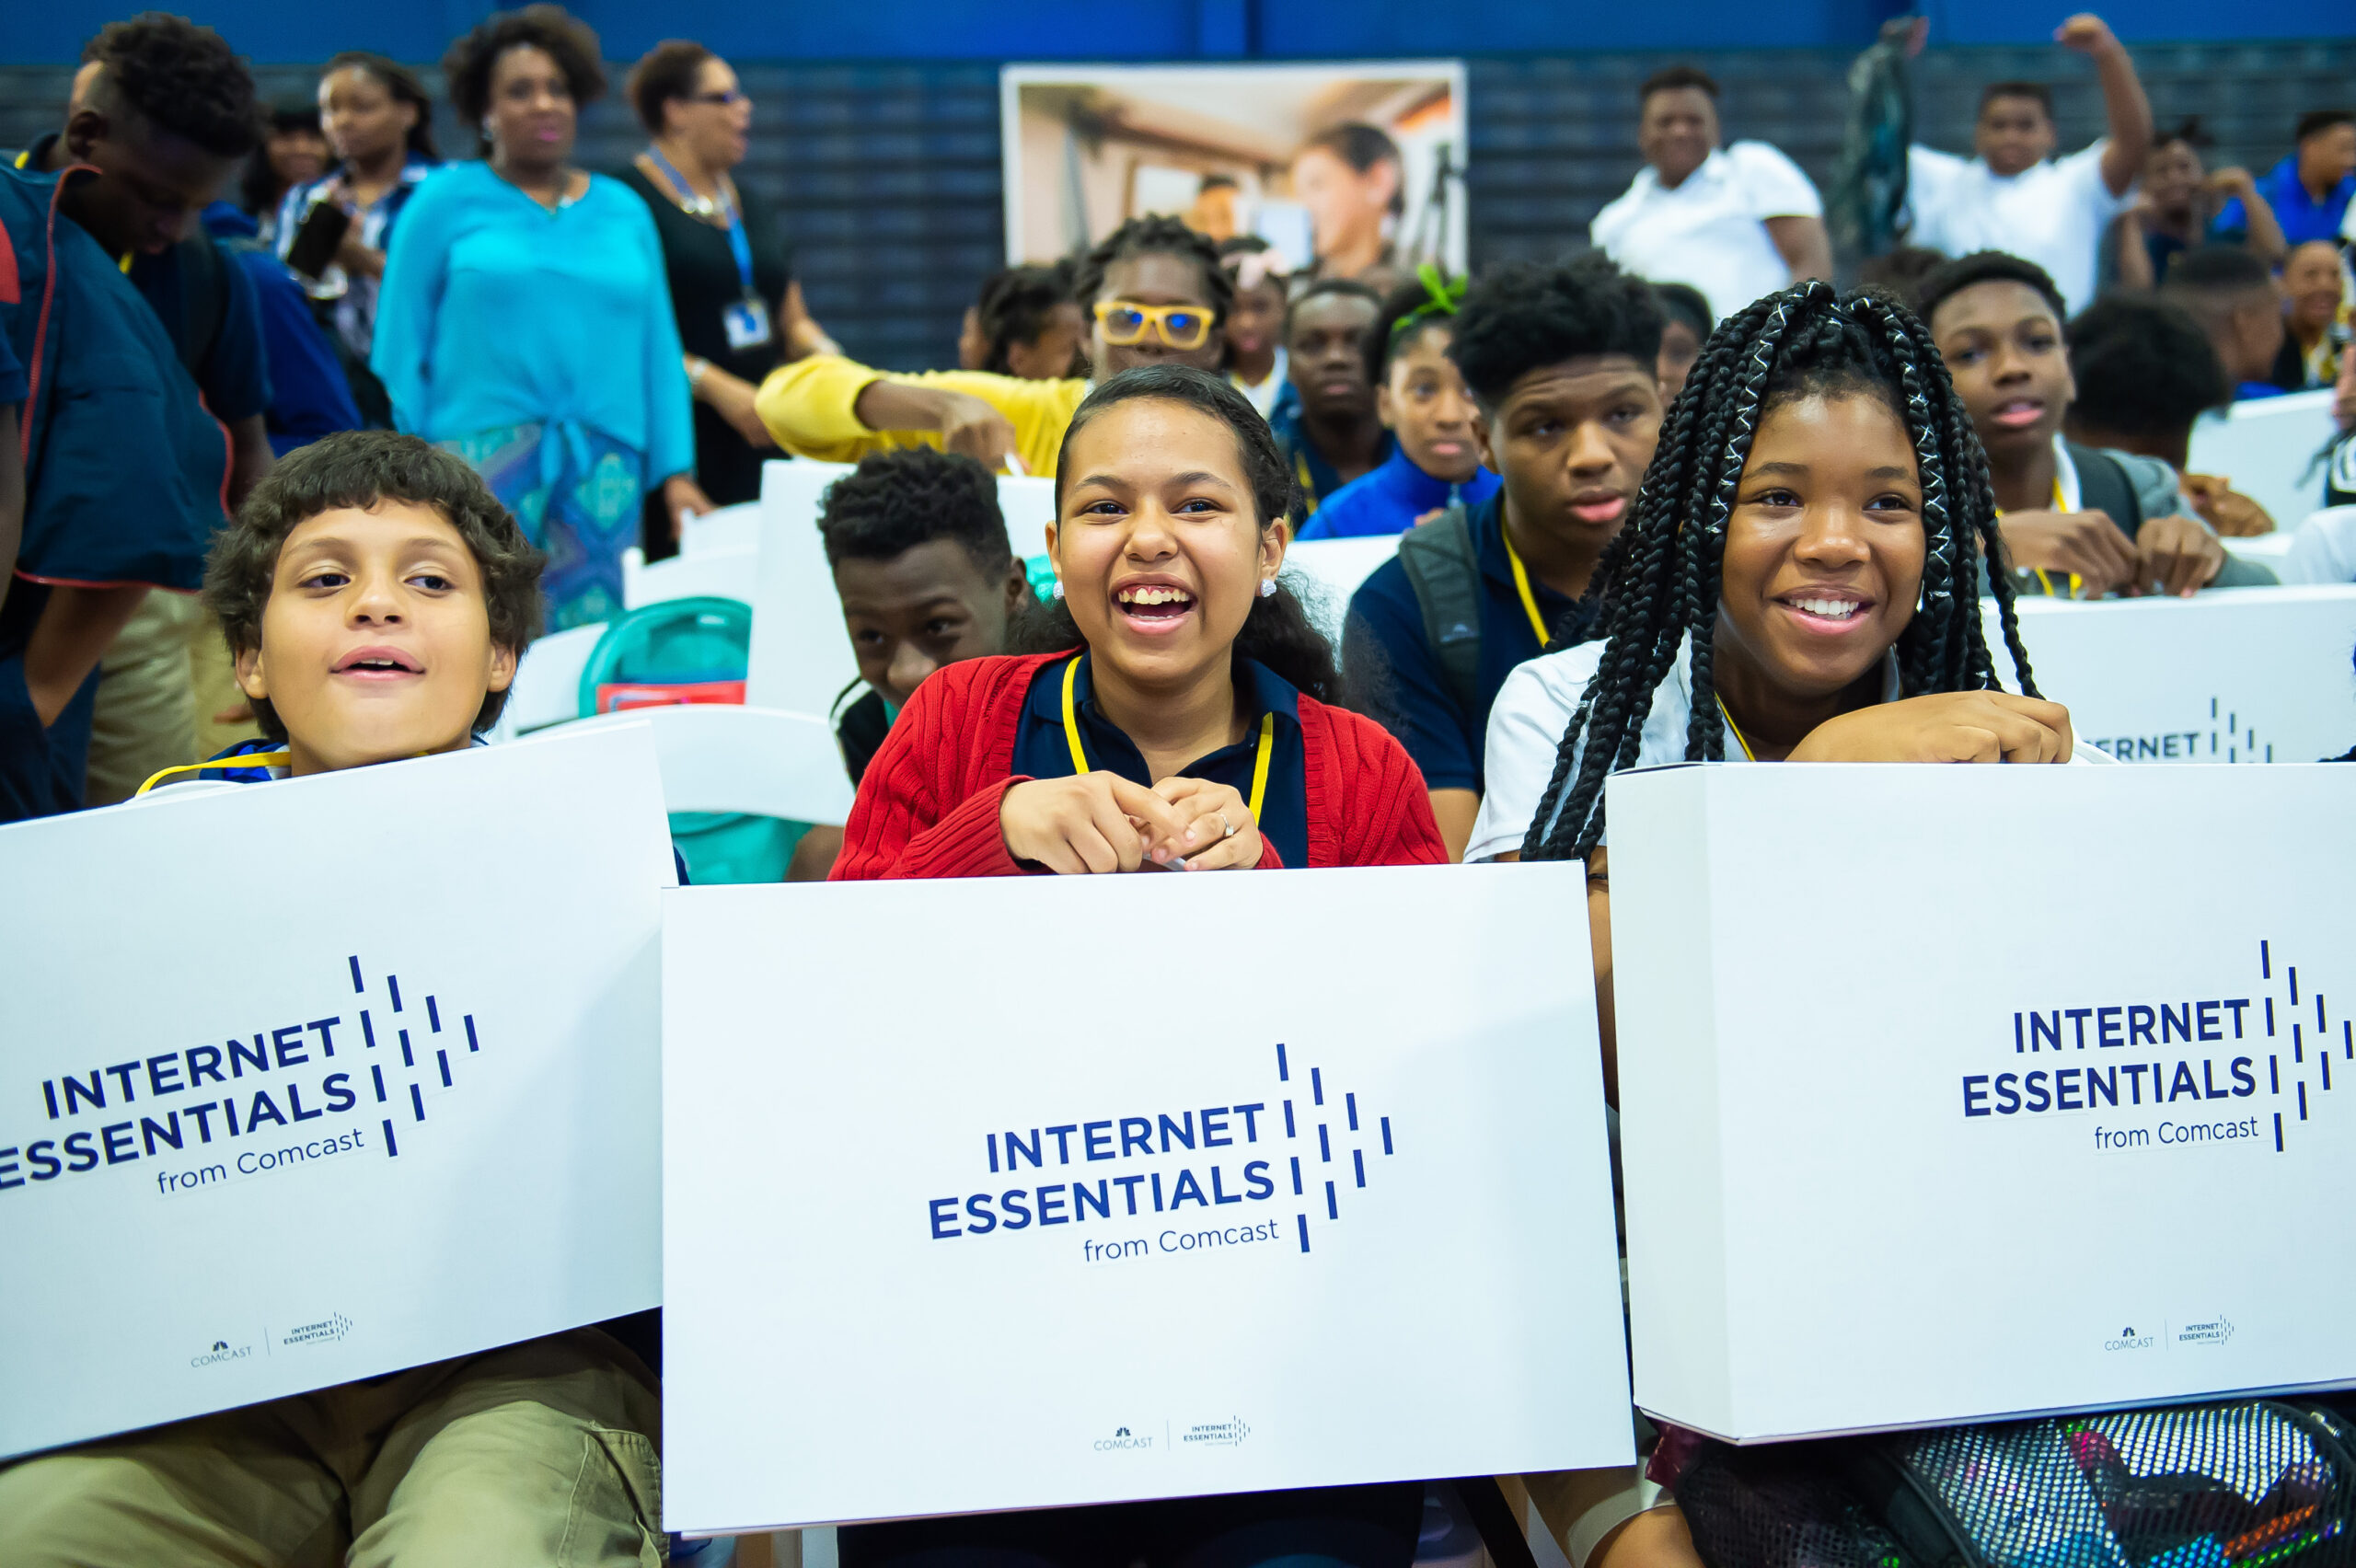 Students sit smiling holding boxes in their laps that say "Internet Essentials." Comcast Internet Essentials Program, an initiative to help bridge the digital divide among students.